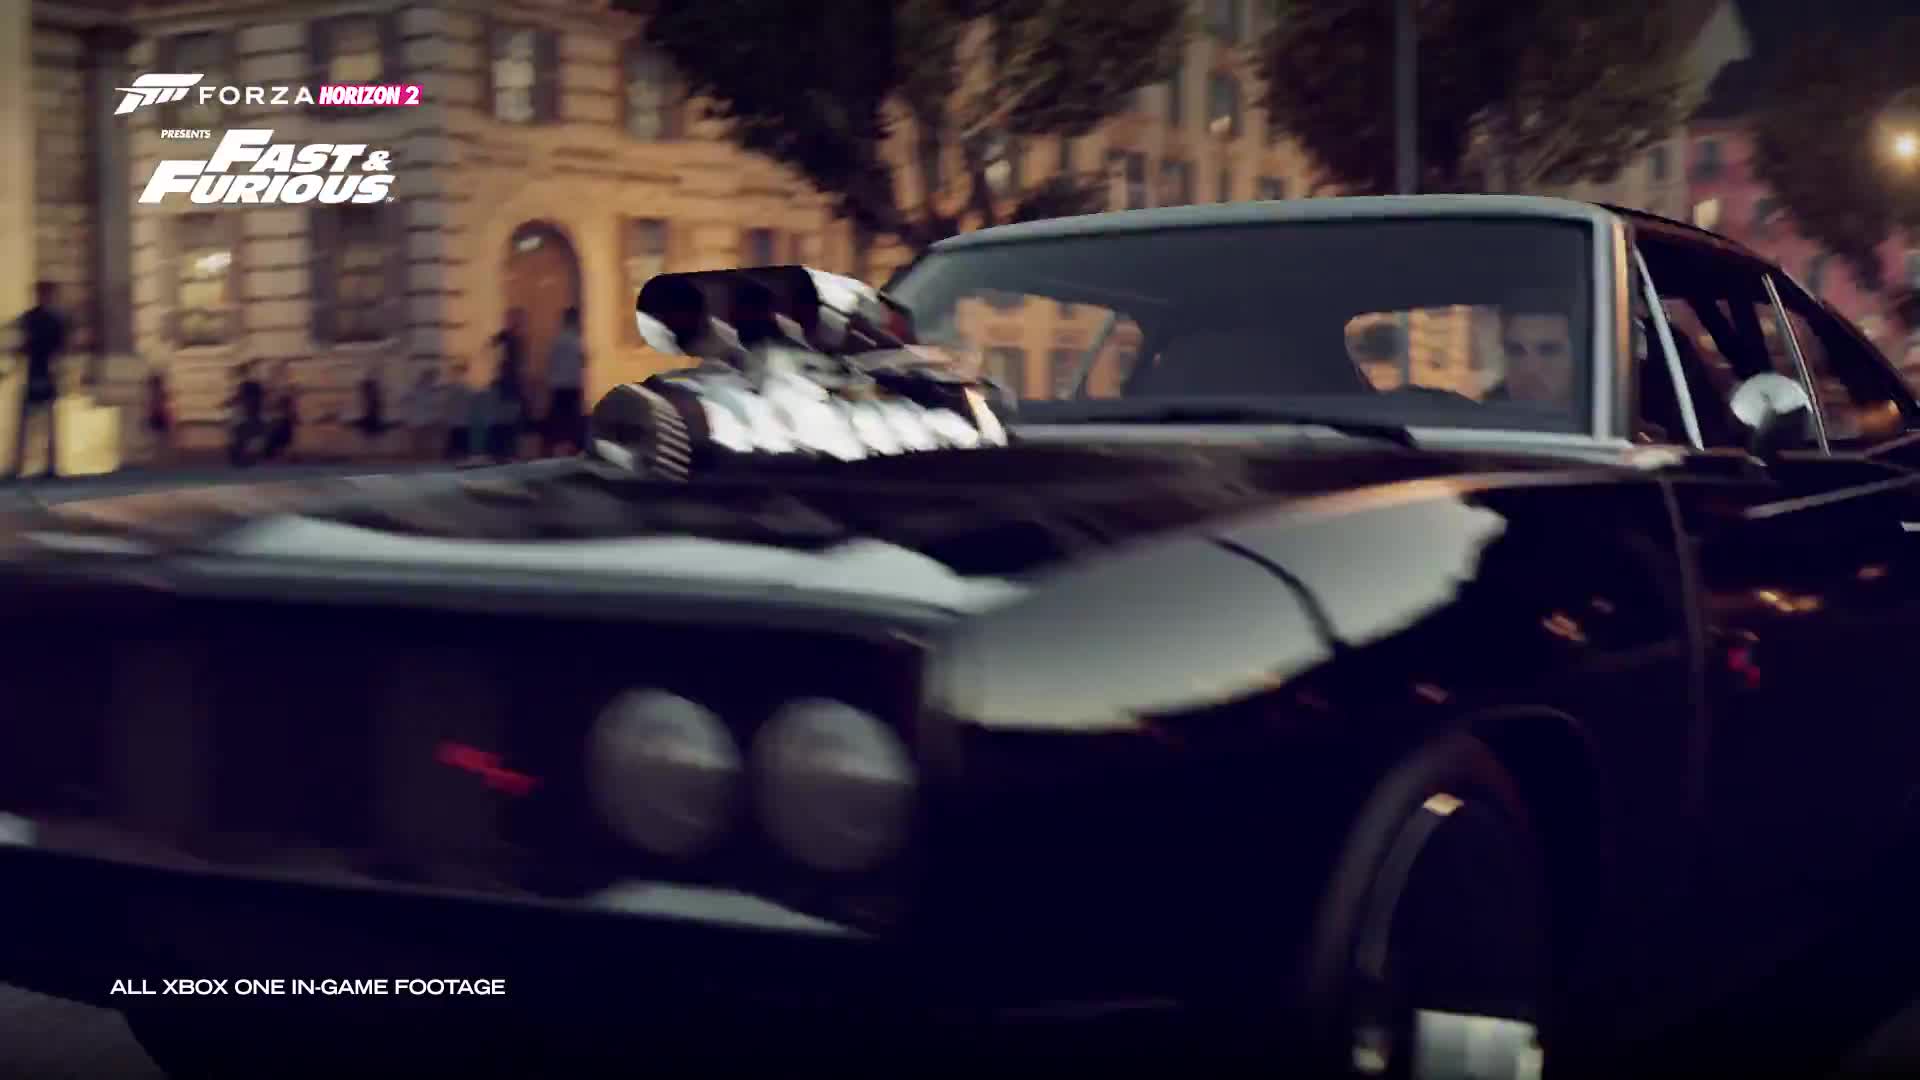 Forza Horizon 2 - Fast and Furious gameplay trailer